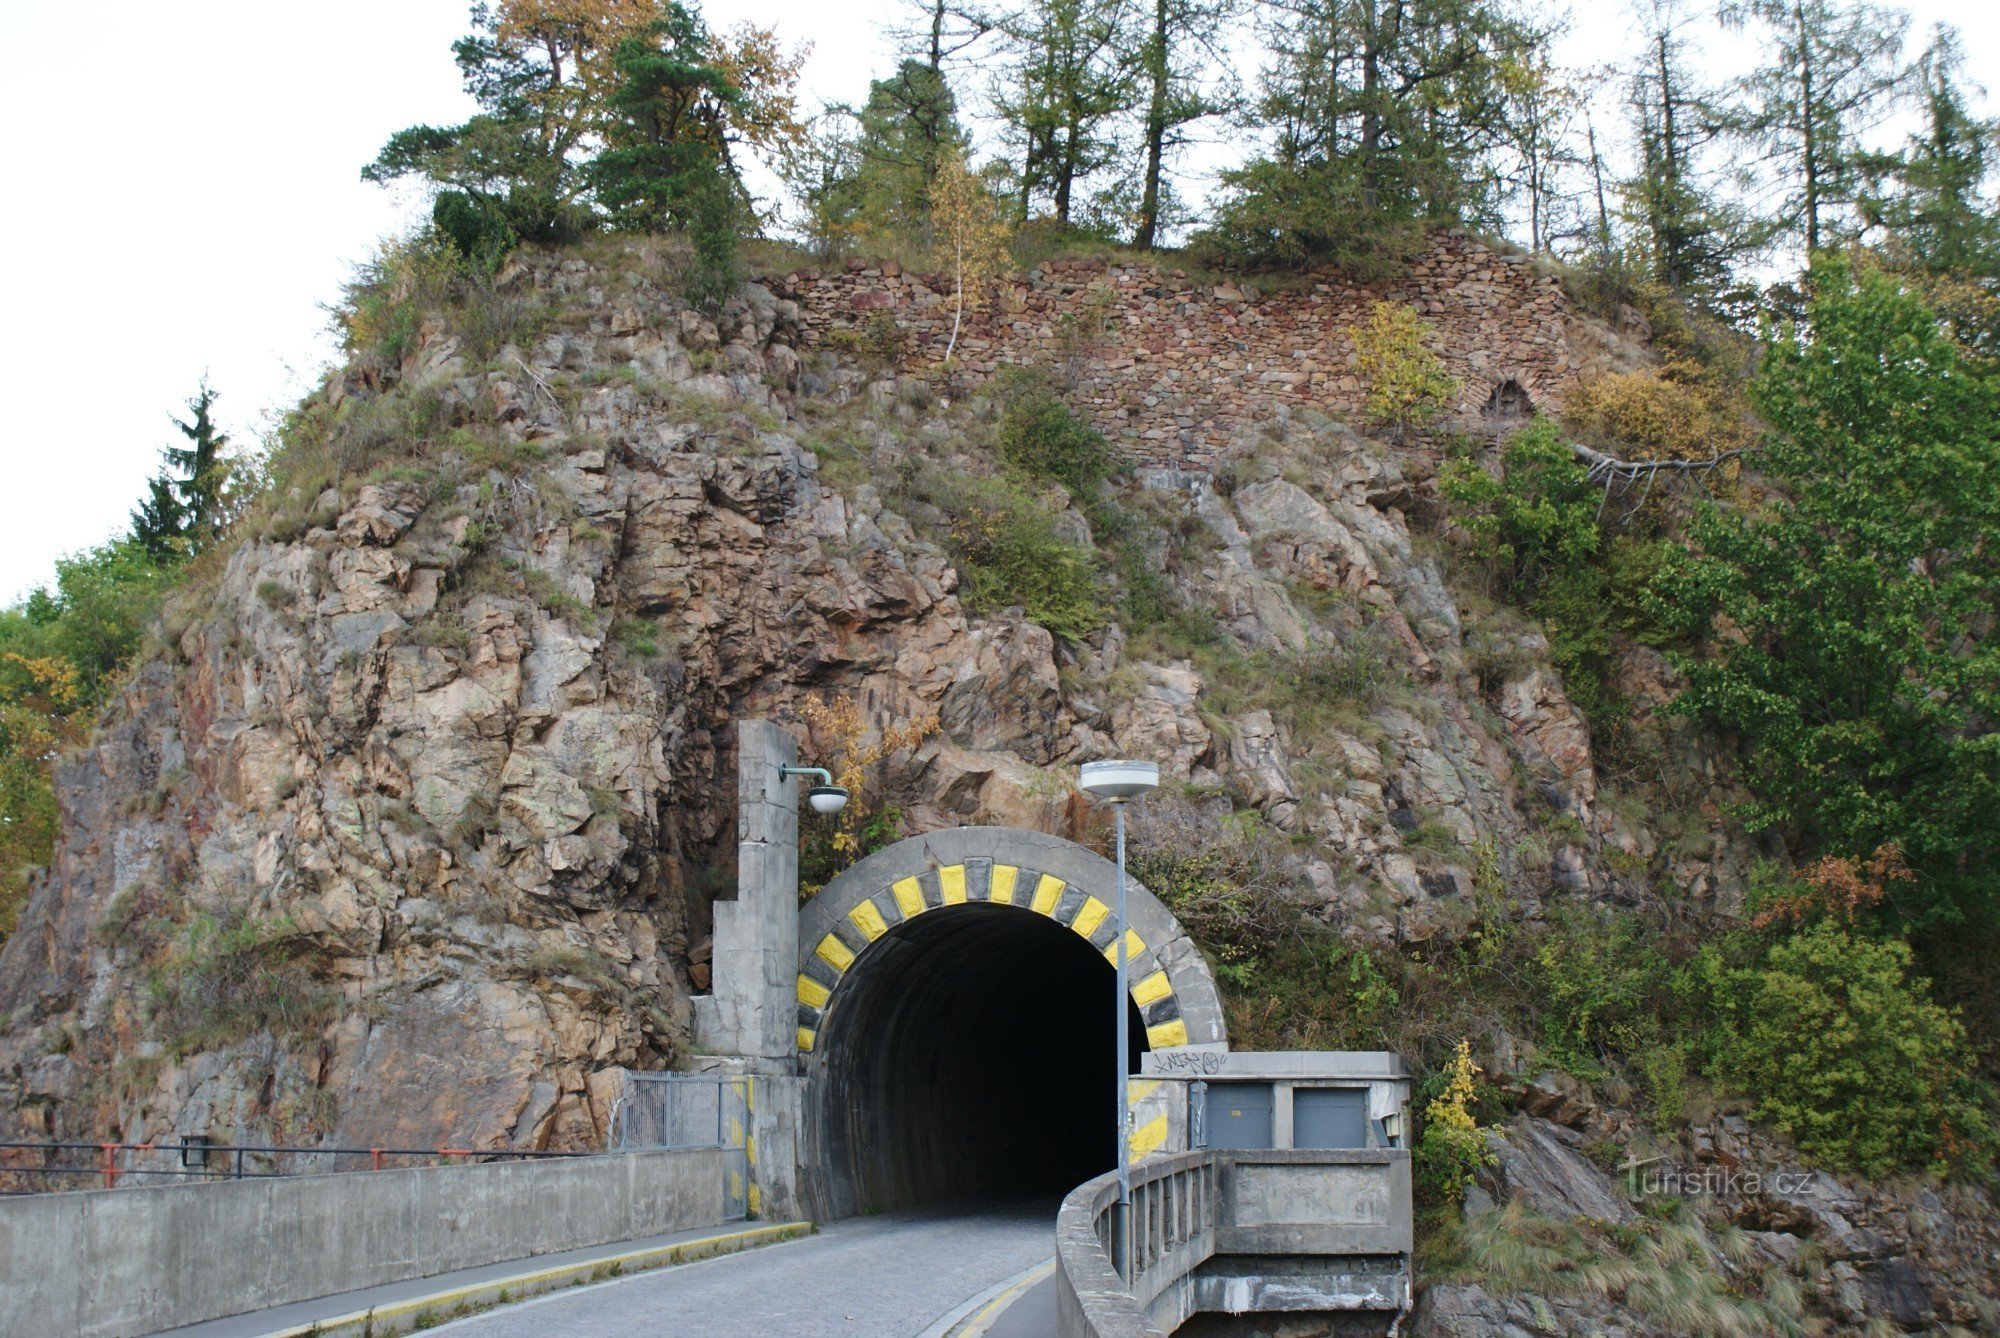 the castle above the road tunnel